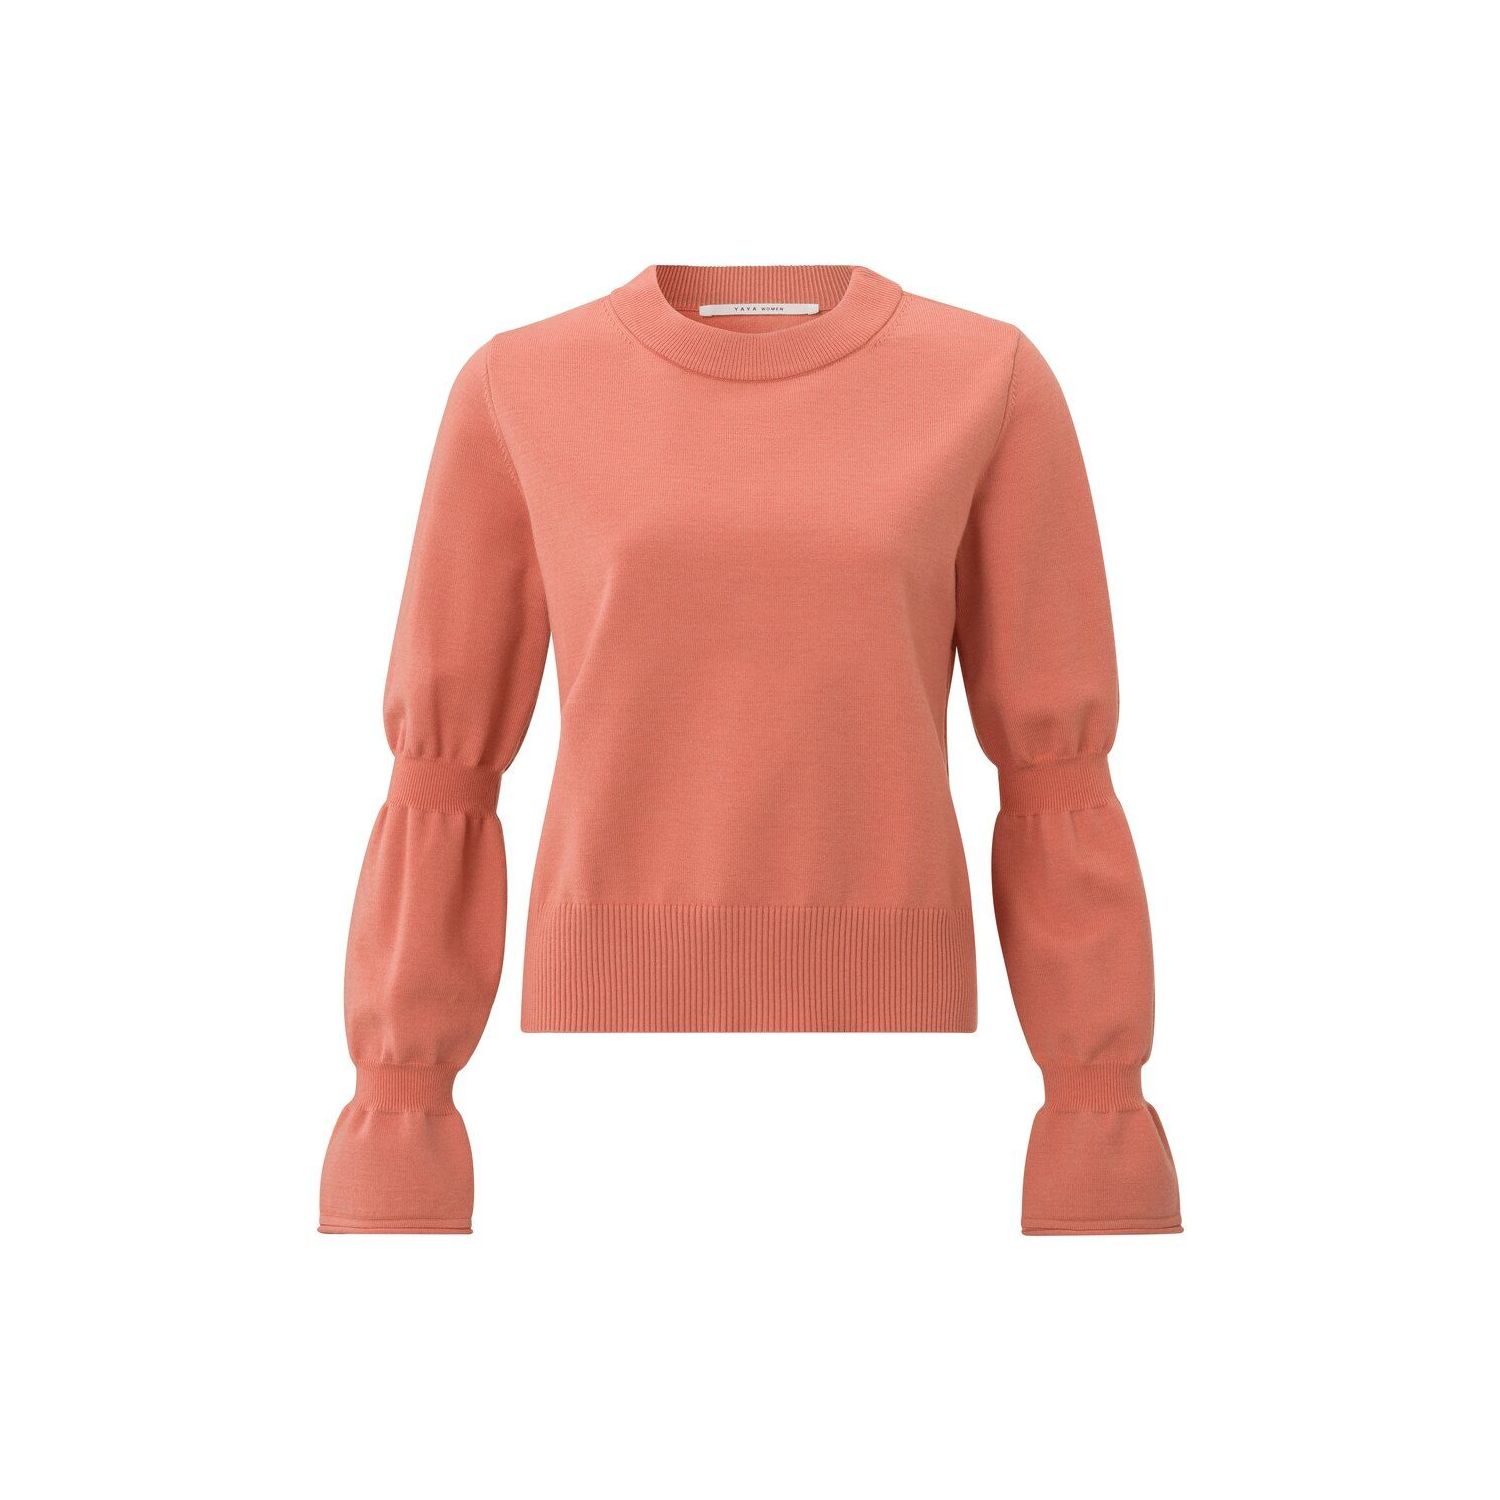 Yaya sweater with sleeve detail crabapple red